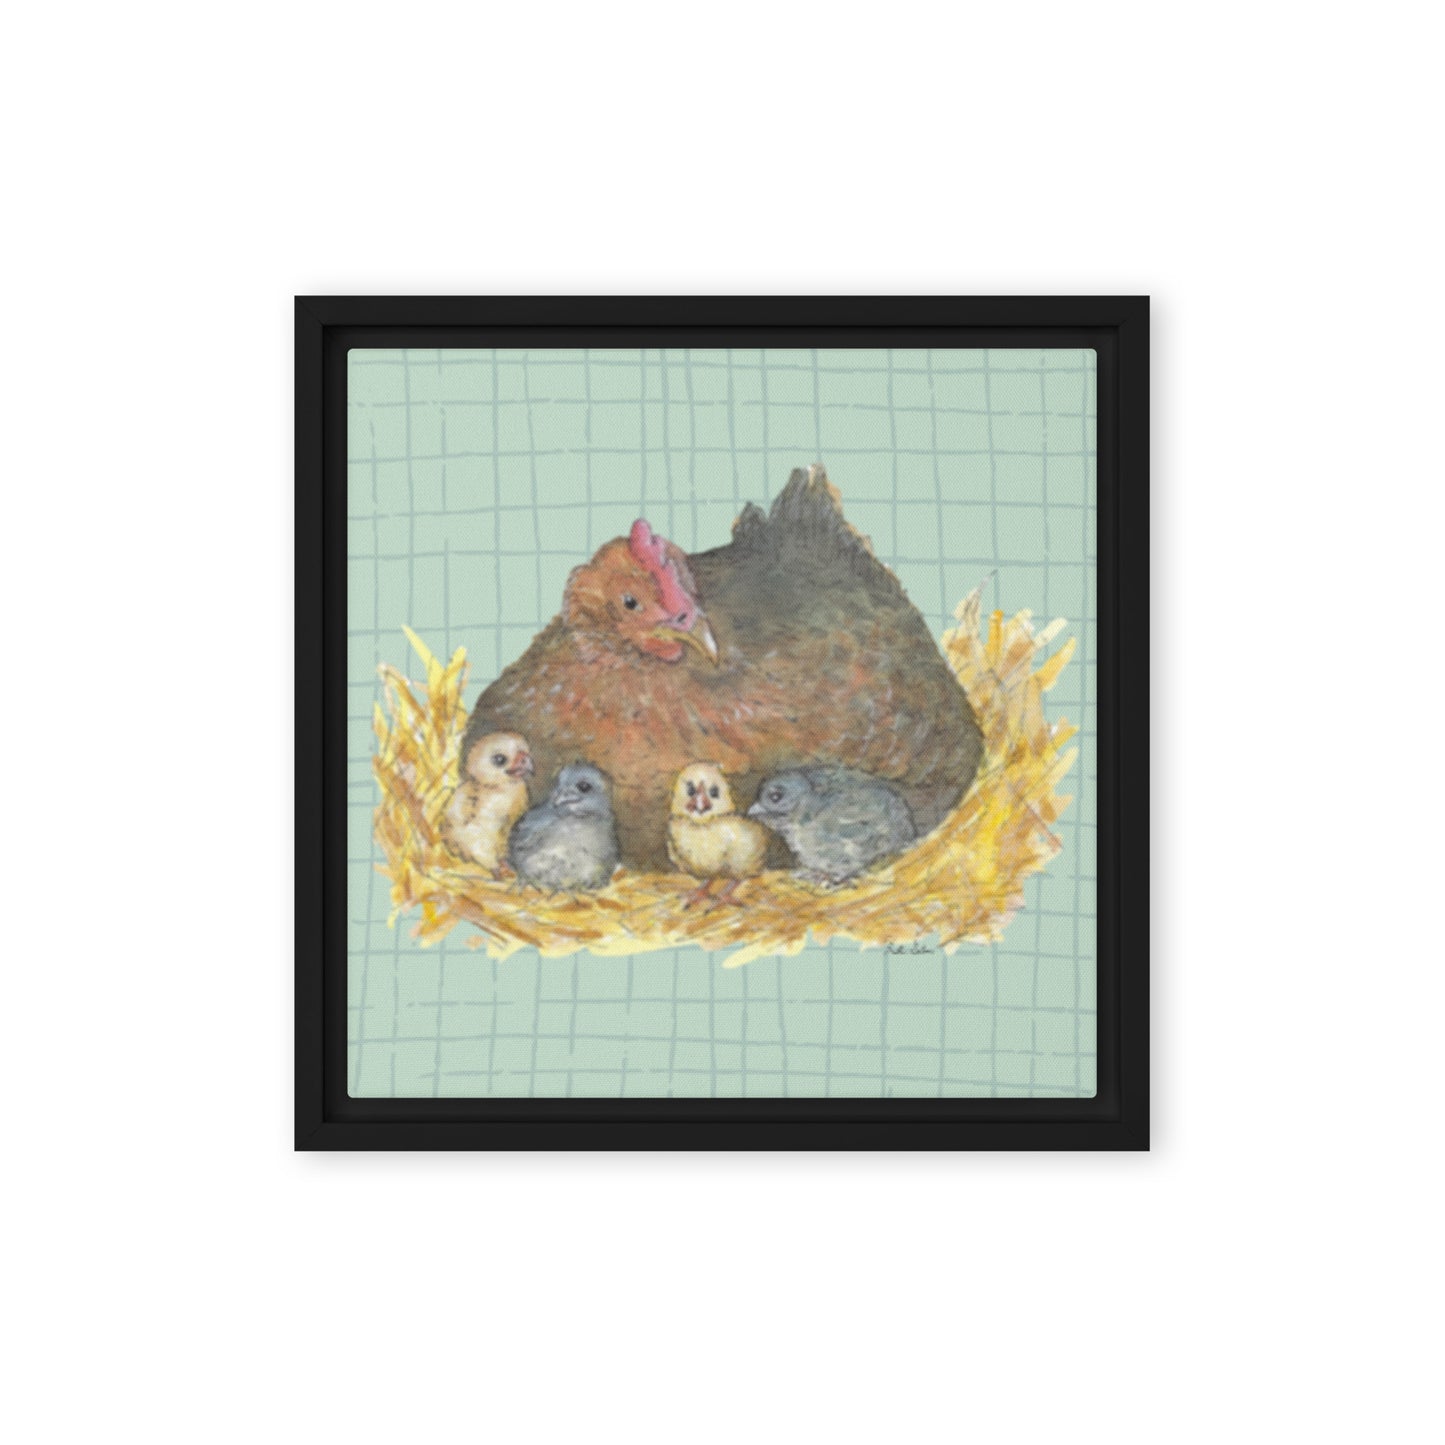 12 by 12 inch Mother Hen Floating Frame Canvas Wall Art. Heather Silver's watercolor painting, Mother Hen, with a green crosshatched background, printed on a stretched canvas and framed with a dark black pine frame. Hanging hardware included.